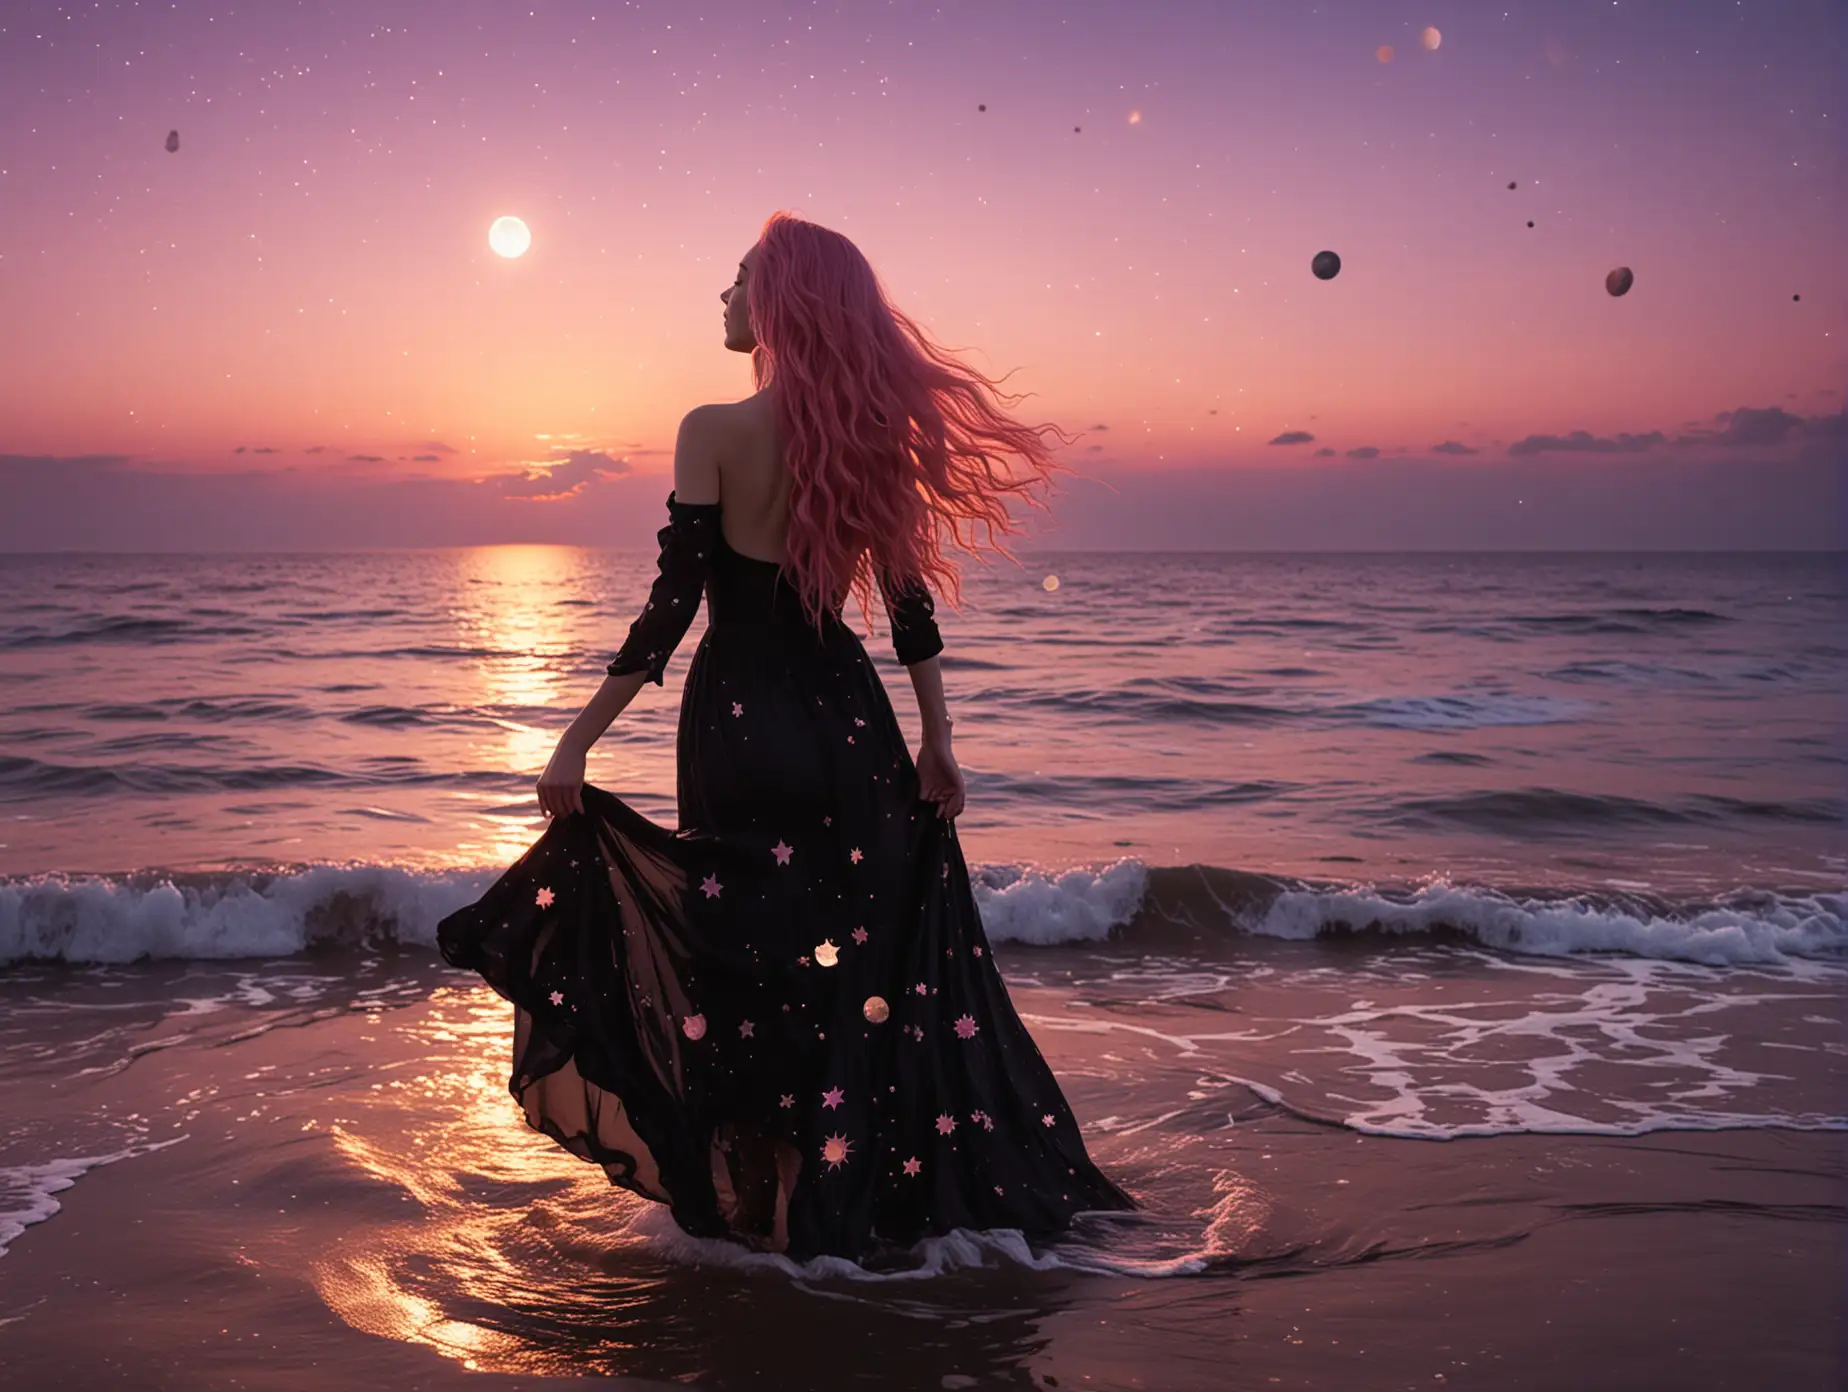 a woman standing in the sea at night time, she has very long pink wavy hair and is wearing a floaty black dress, the sun moon stars planets are bursting bright in the sunset pink purple peach sky above her head